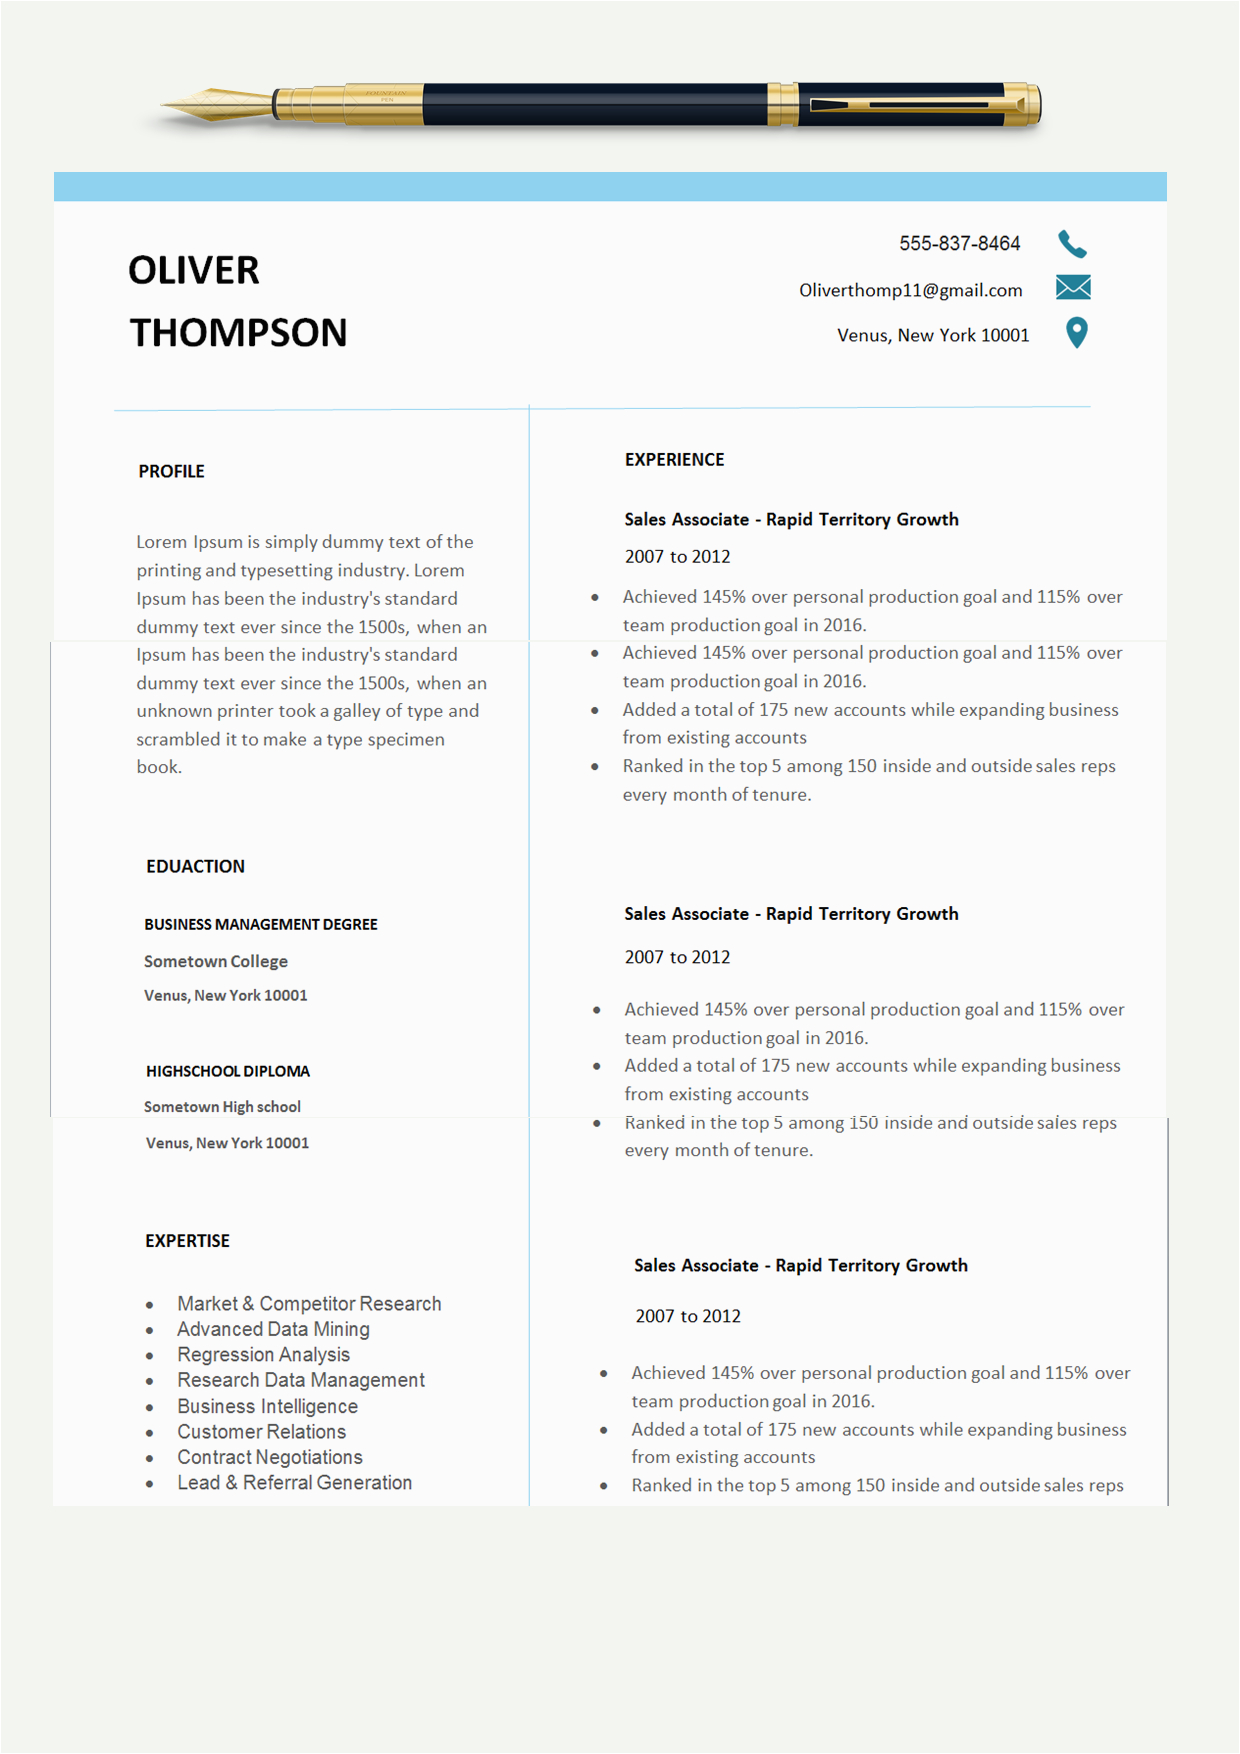 Sample Resume format that Can Be Edited 1 Page Cv Template Word 84 Free E Page Resume Templates Edit